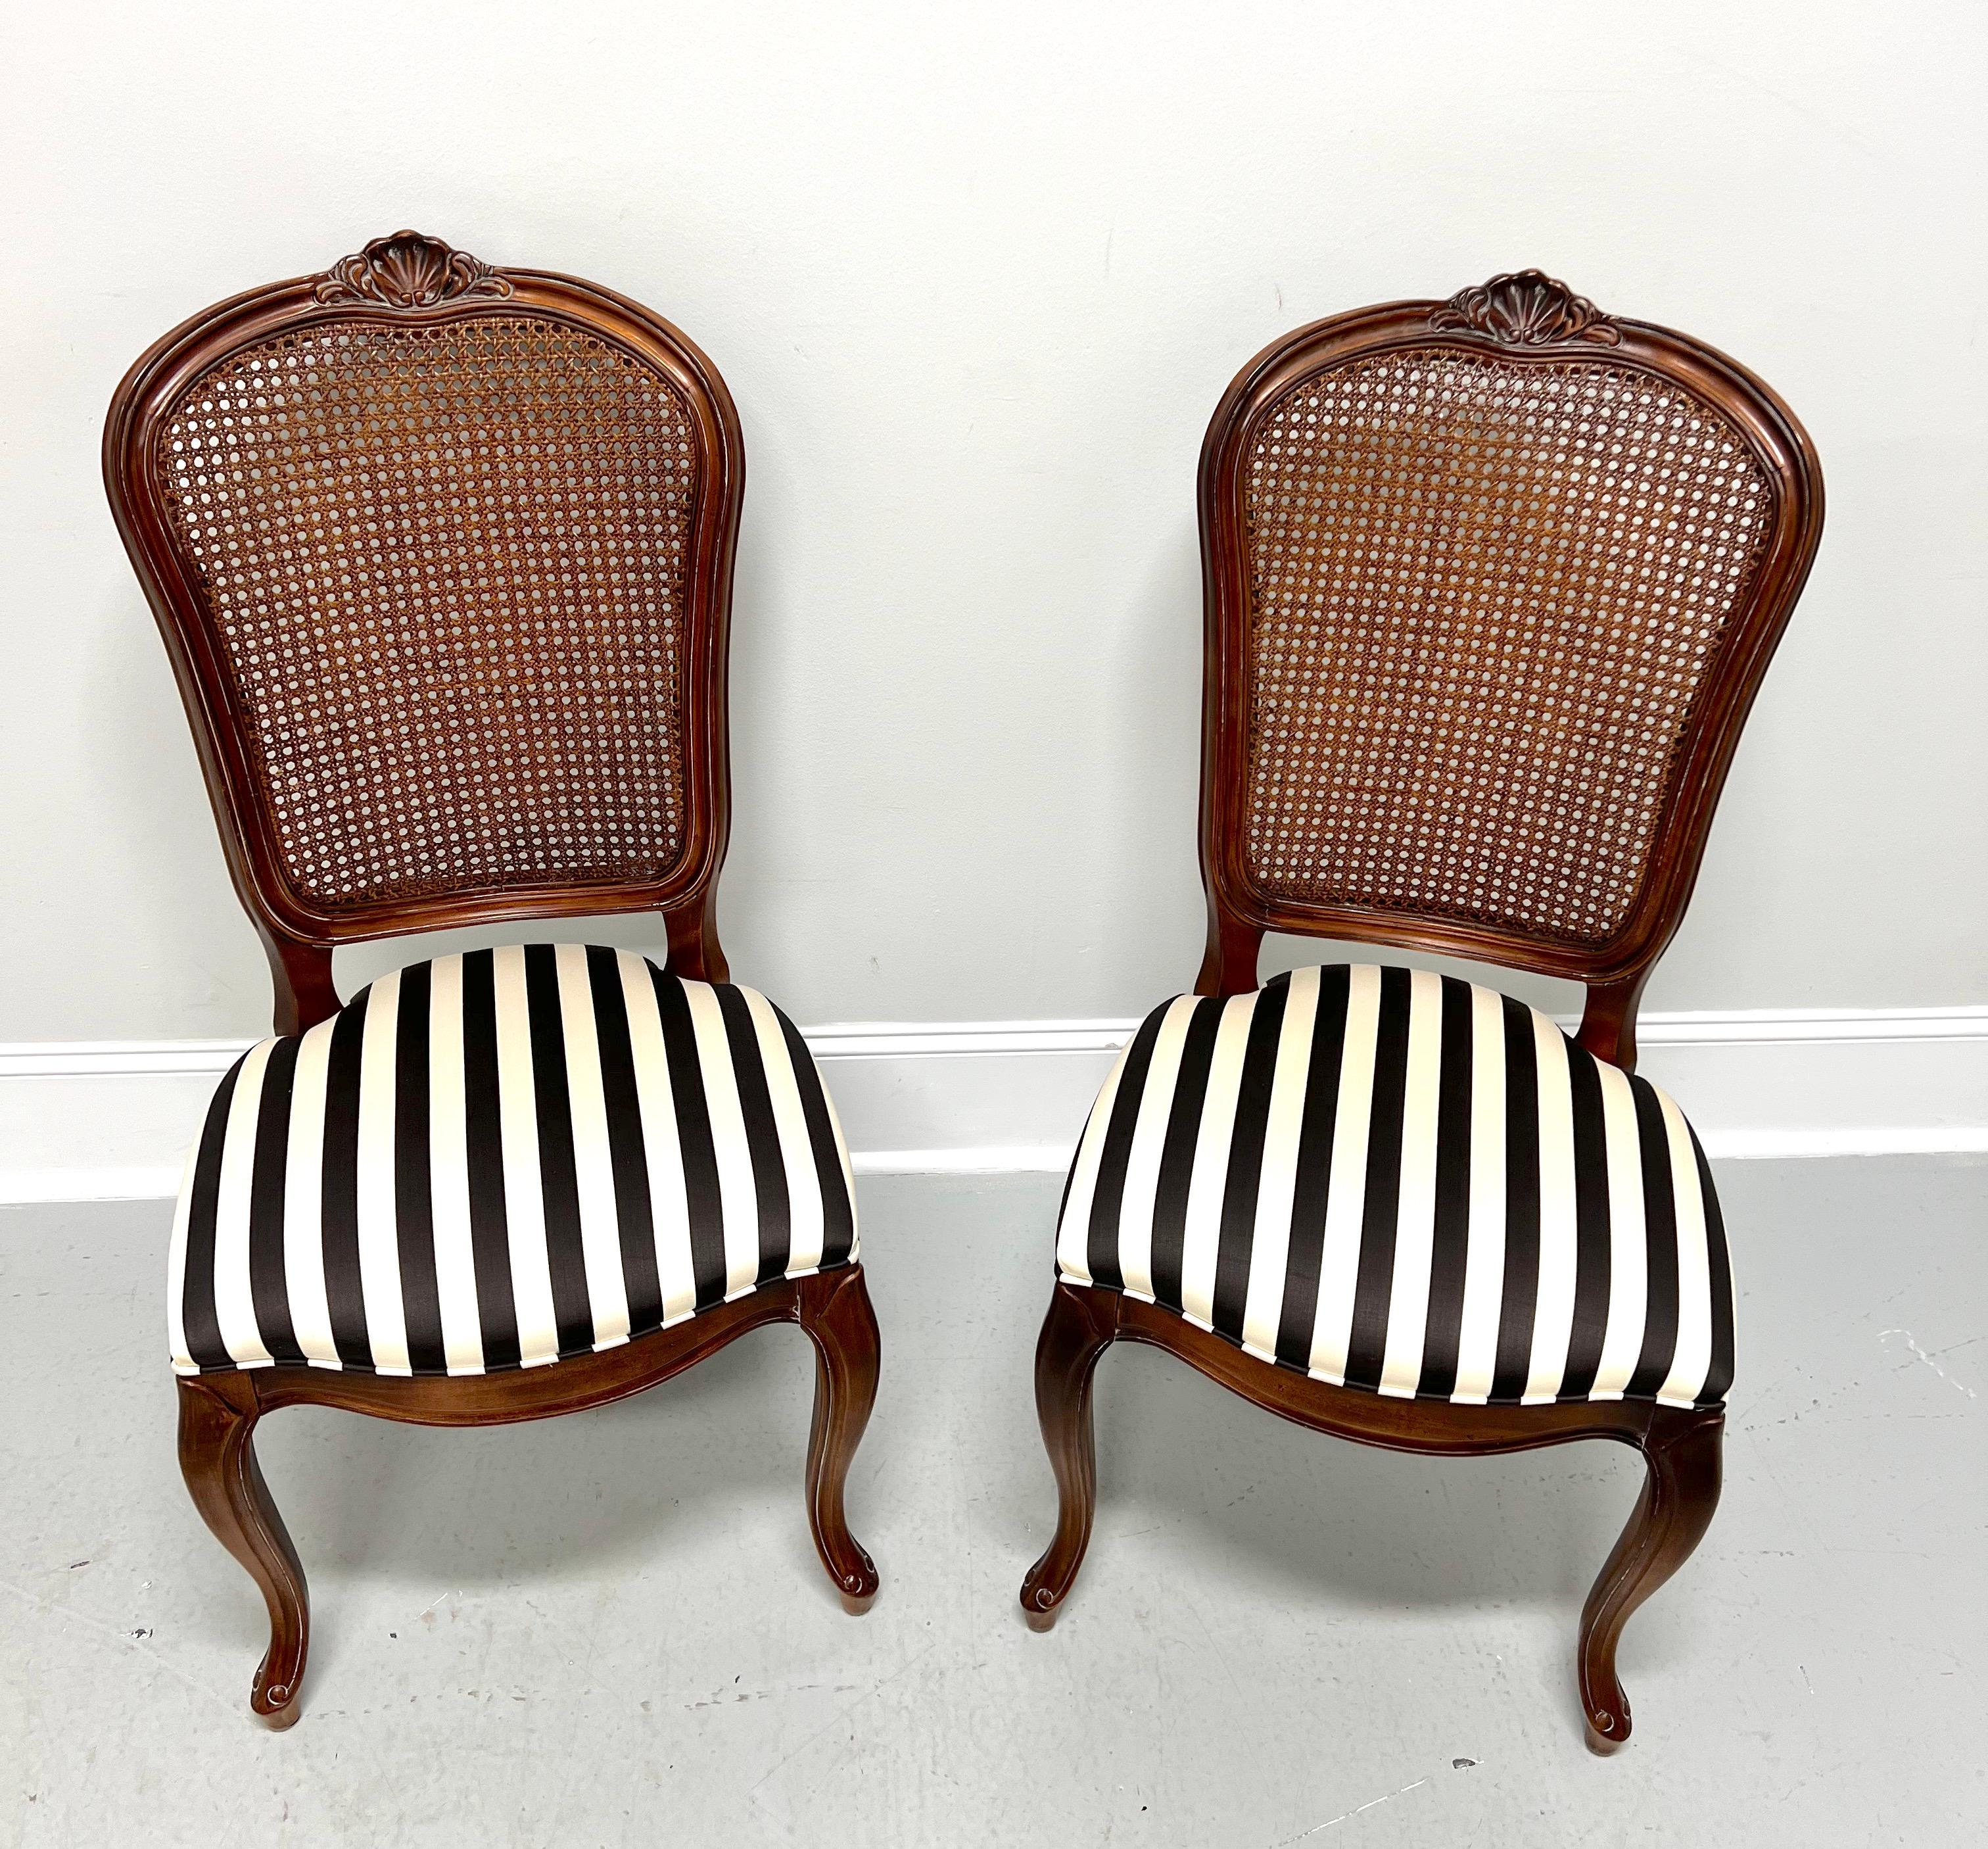 A pair of French Provincial style dining side chairs by Century Furniture, from their Chardeau Collection designed by Raymond K Sobota. Solid cherry wood, carved detail to crest rail, caning to backrest, black & white stripe pattern fabric